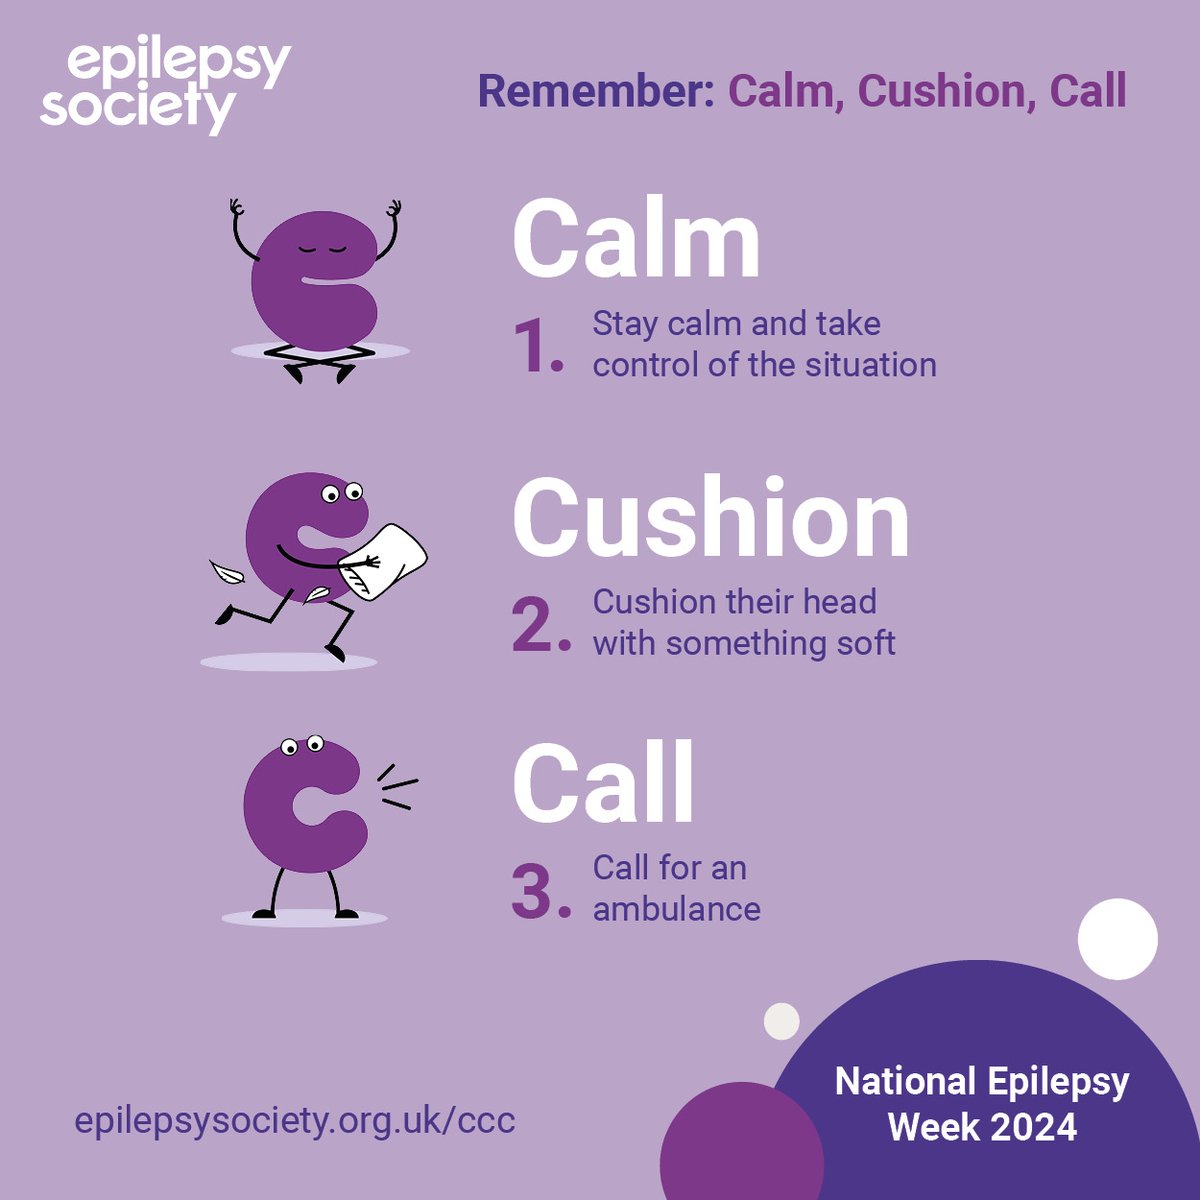 💜 #NationalEpilepsyWeek finishes today and @epilepsysociety are highlighting the three most important words to remember for seizure first aid - “Calm, Cushion, Call”. #NationalEpilepsyWeek2024